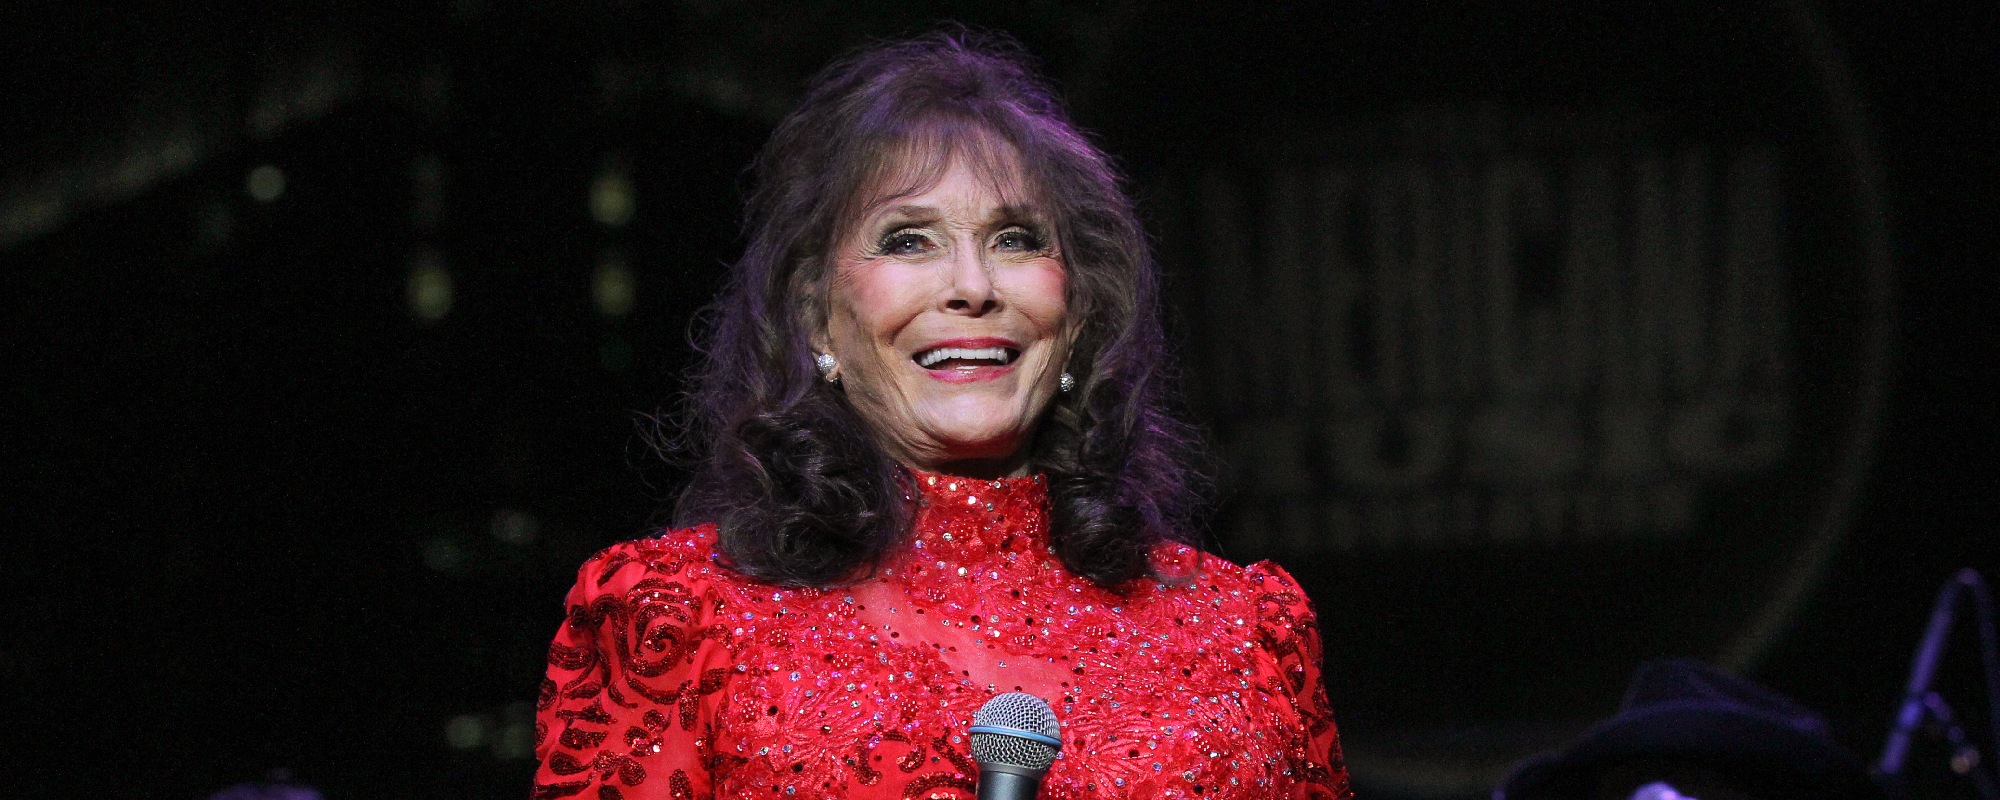 Loretta Lynn’s Daughter Gives Update After Cancer Surgery: “God How I Wish My Sweet Mama Could Just Hold Me Tonight”